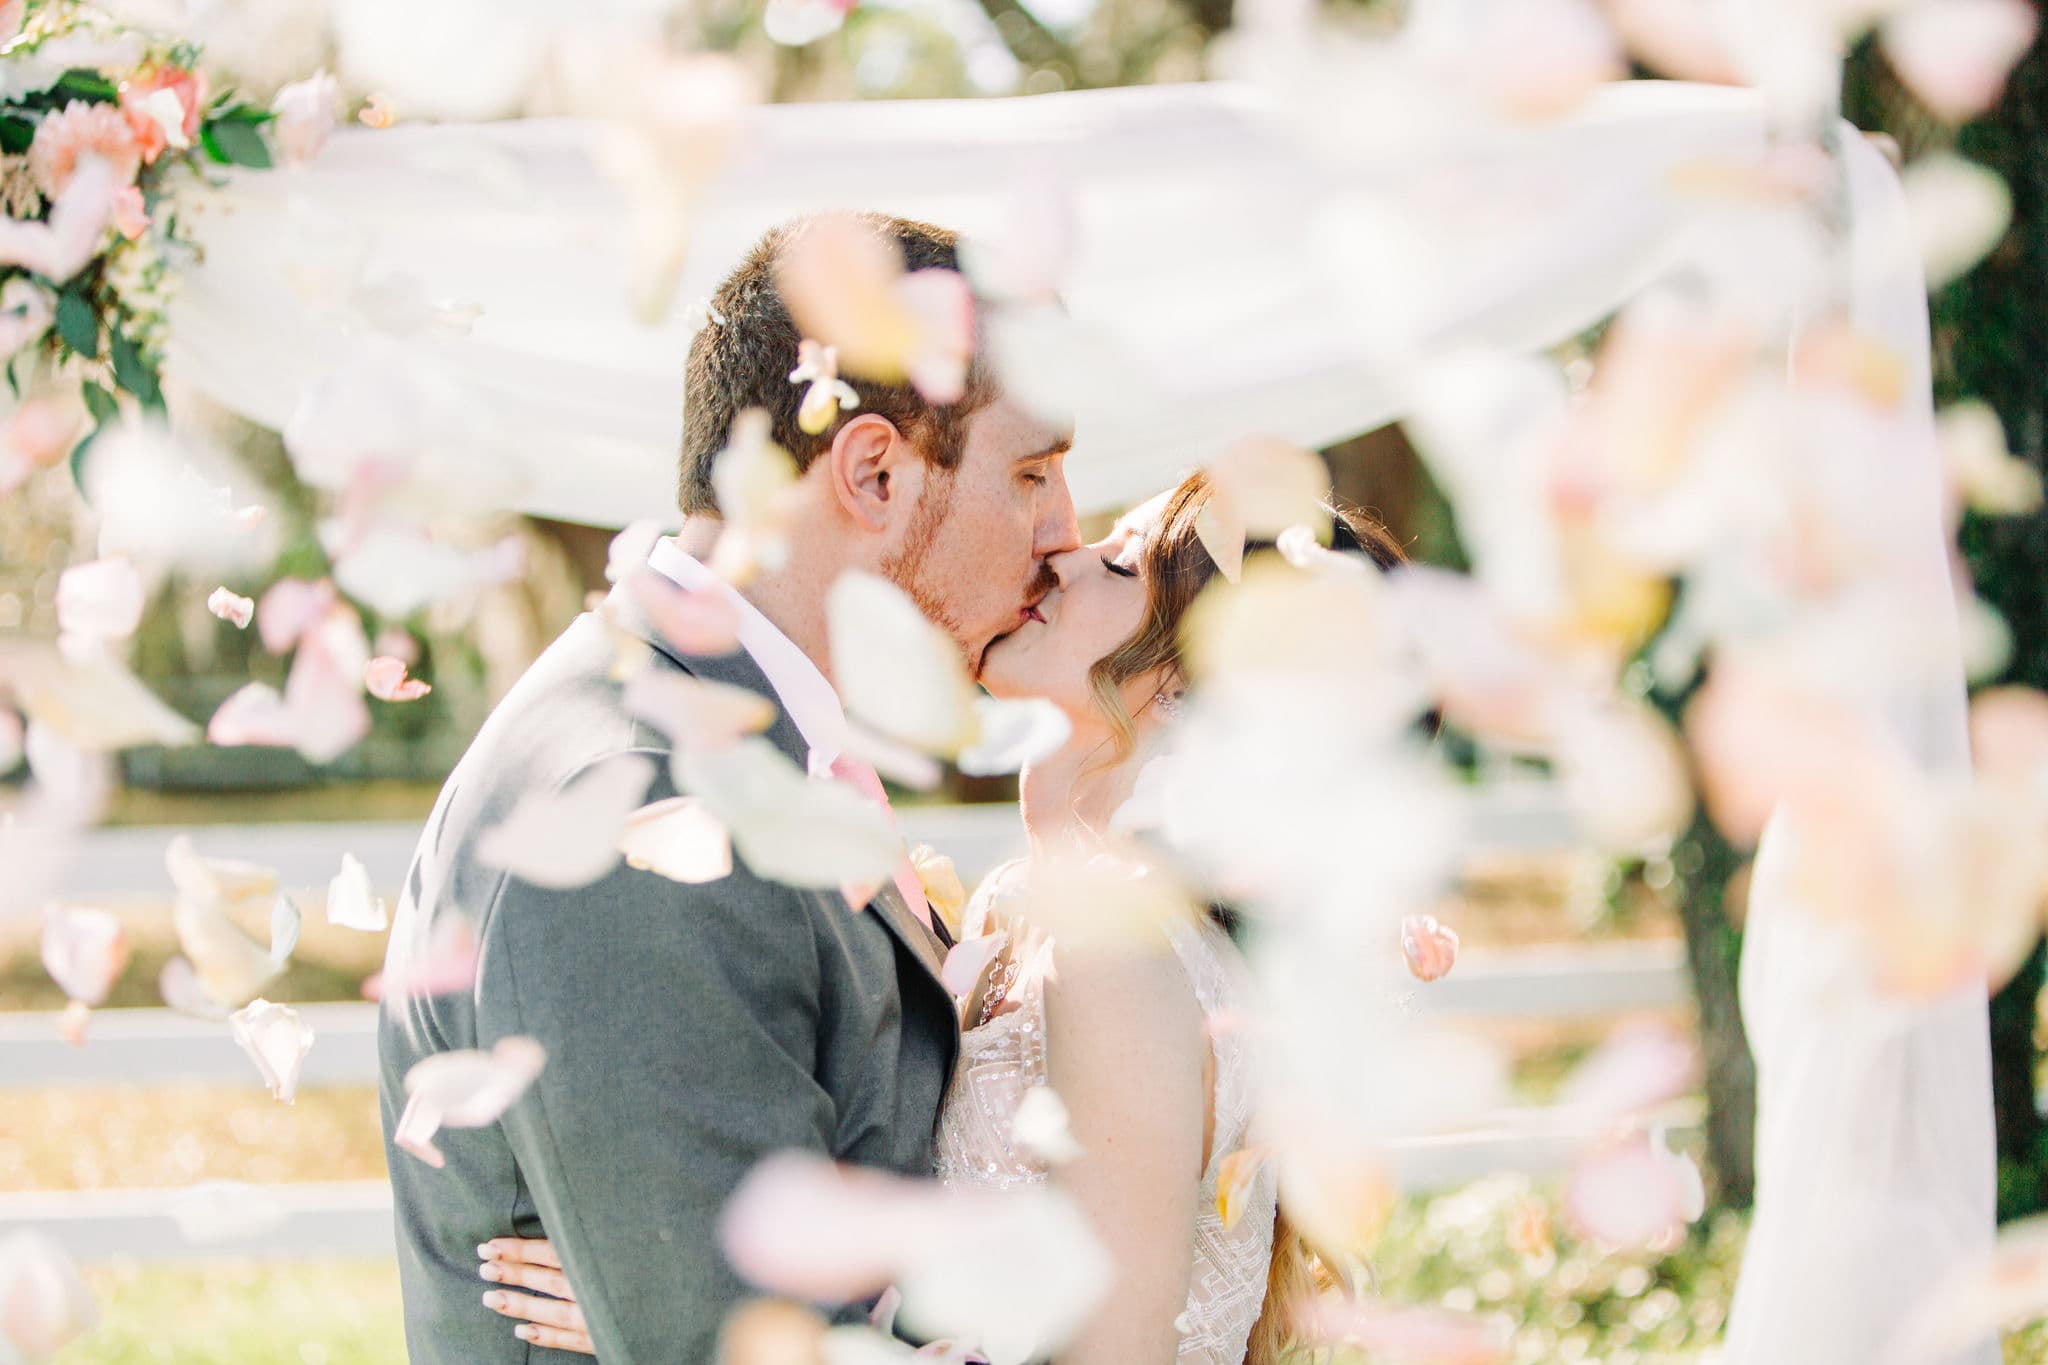 bride and groom kissing with rose petals falling in the air around them